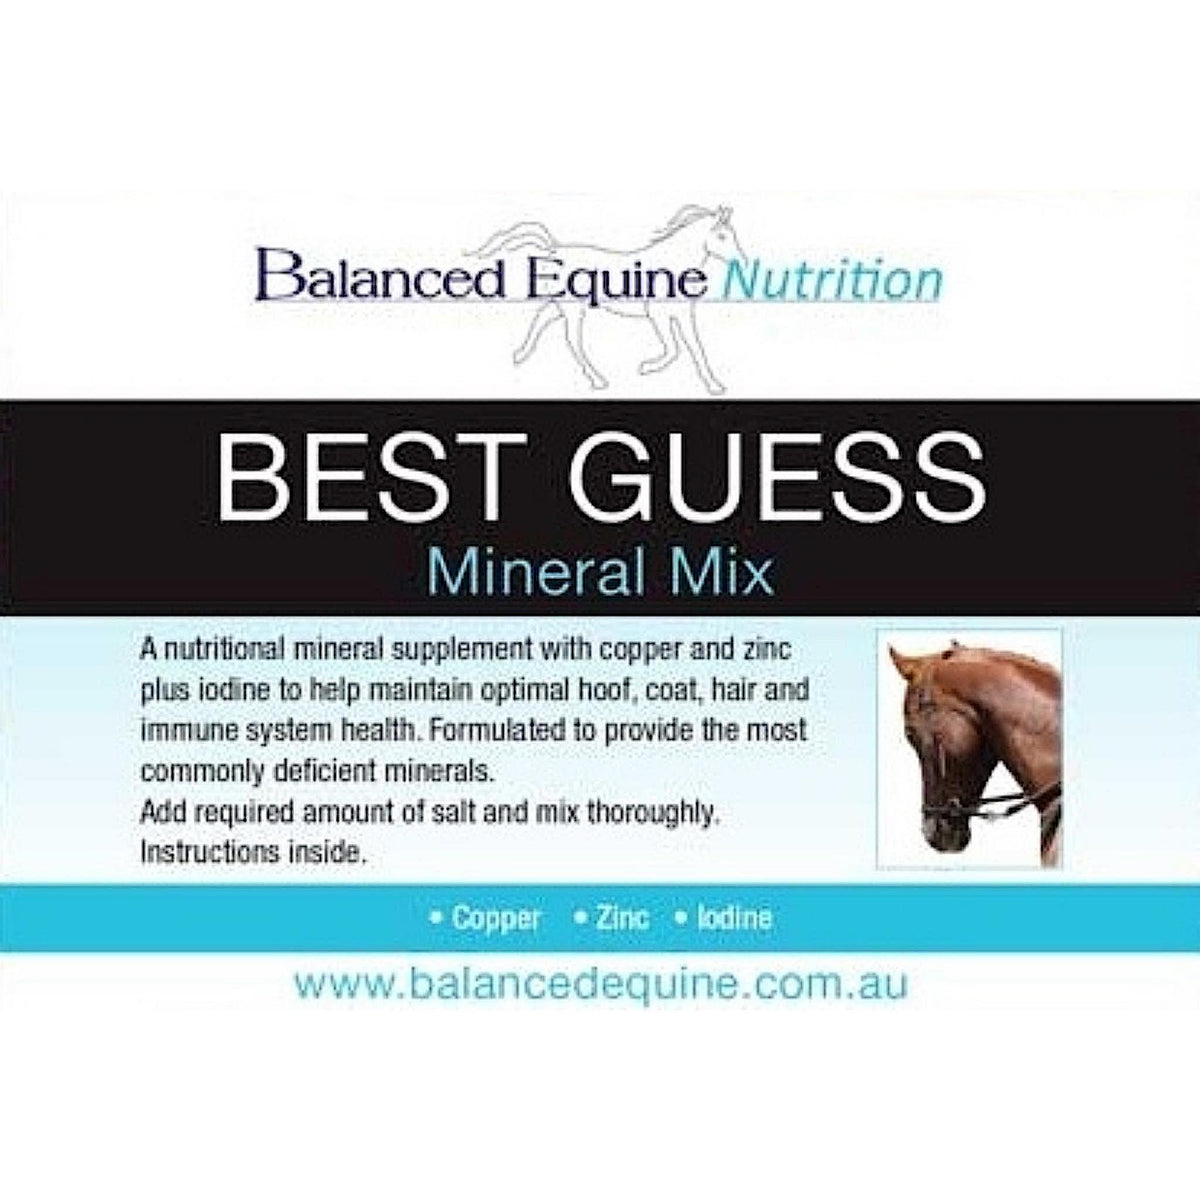 Packaging titled &quot;Best Guess - Mineral Mix&quot; with description of product.